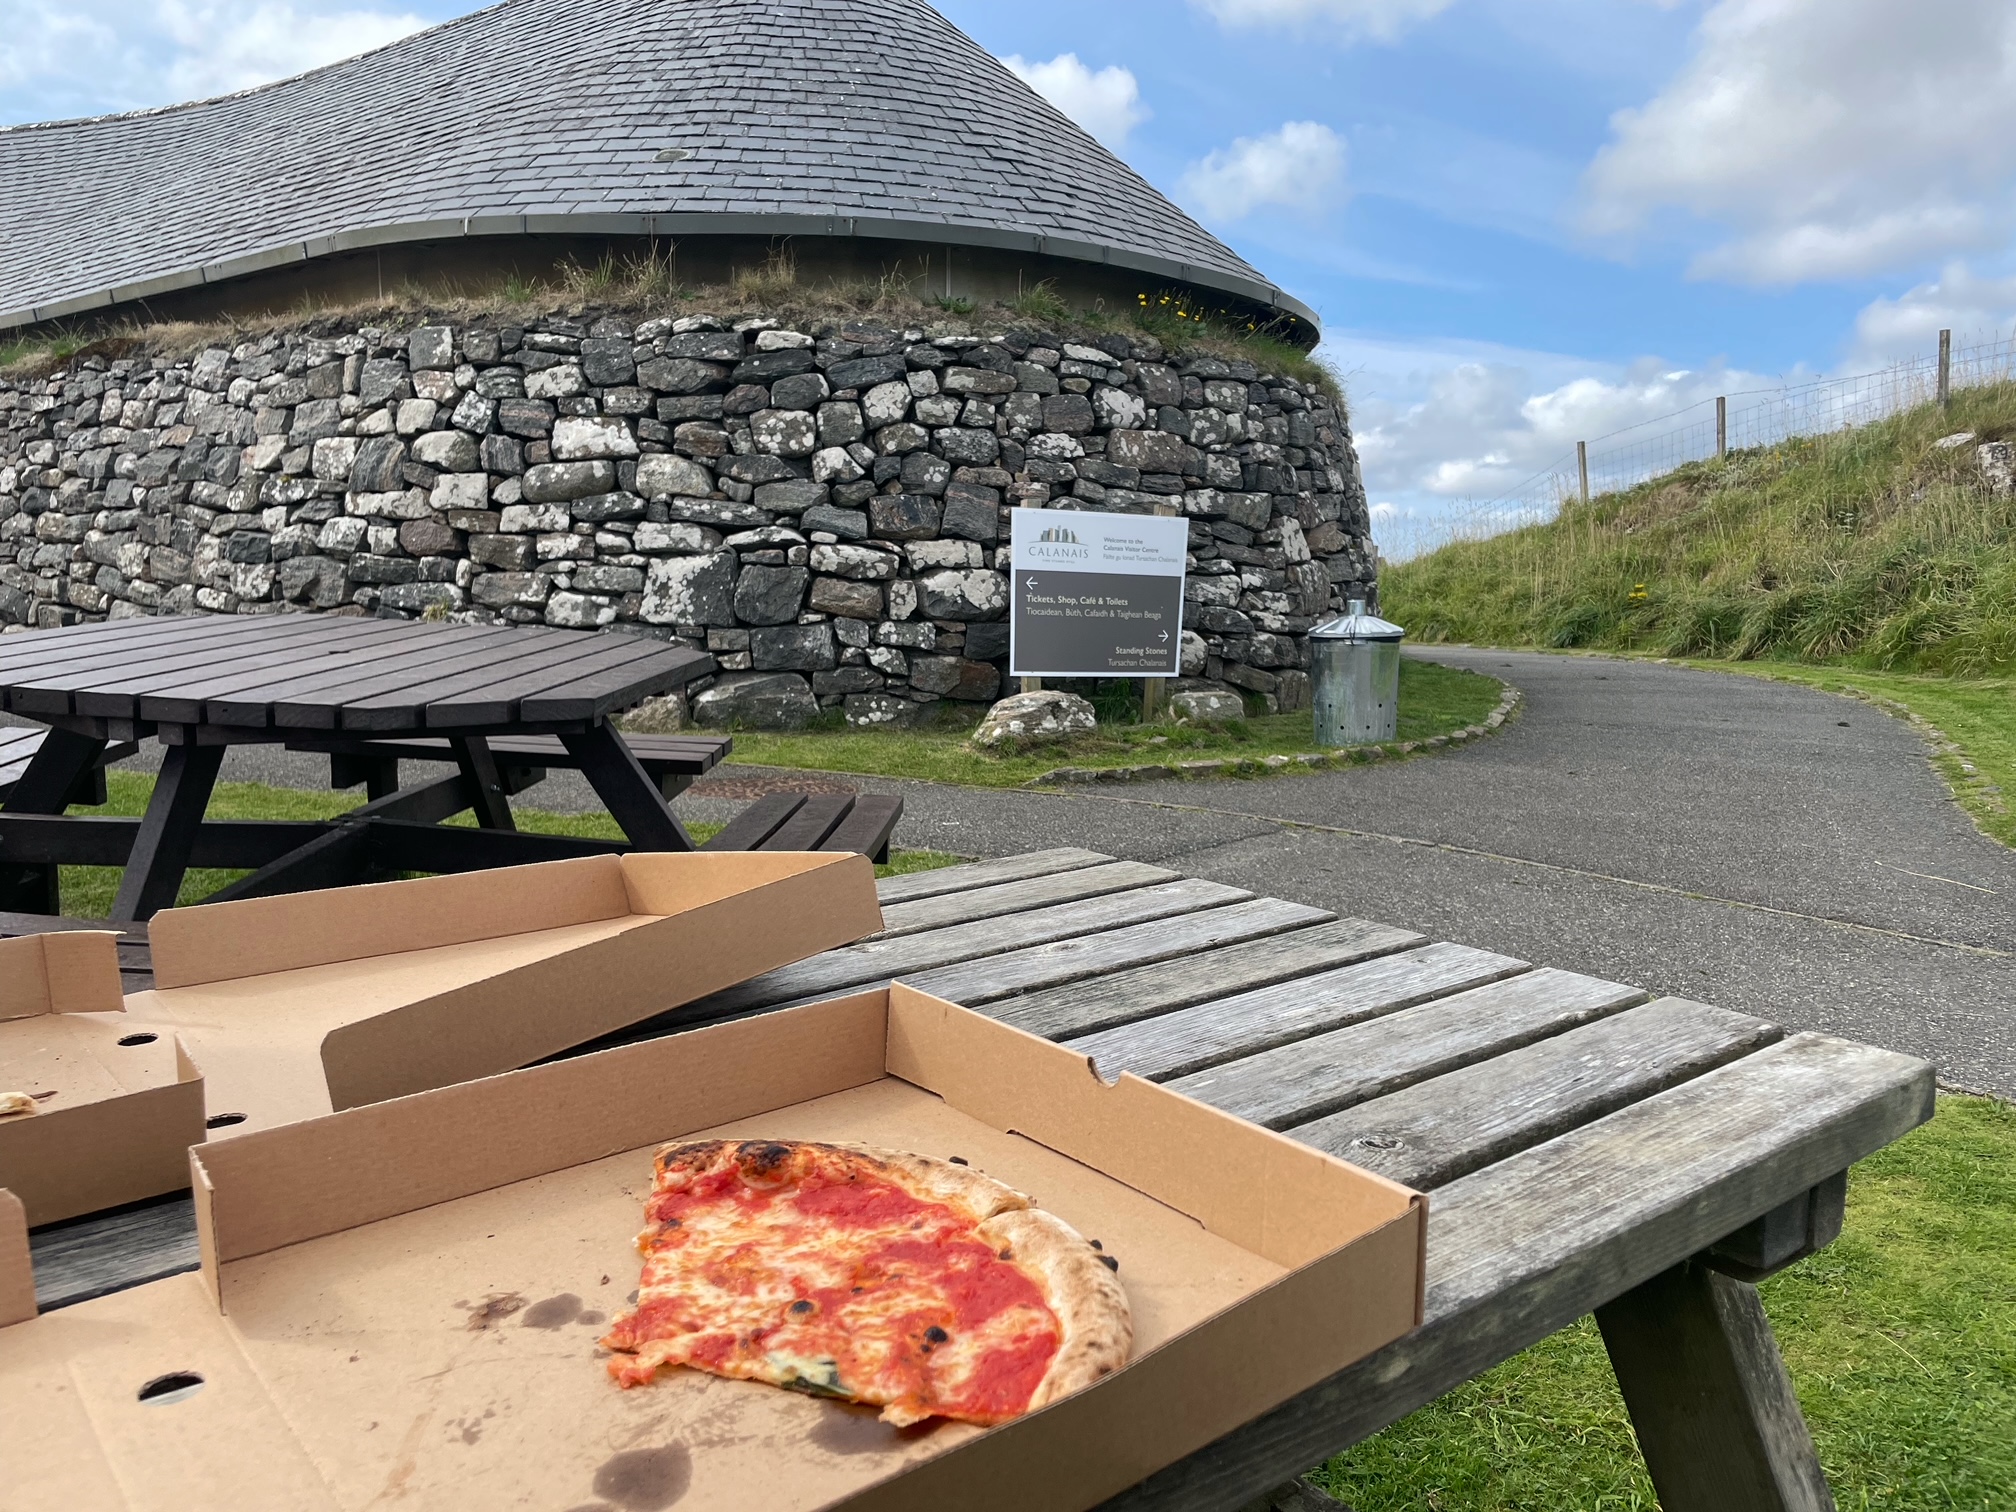 Pizza at the Stones